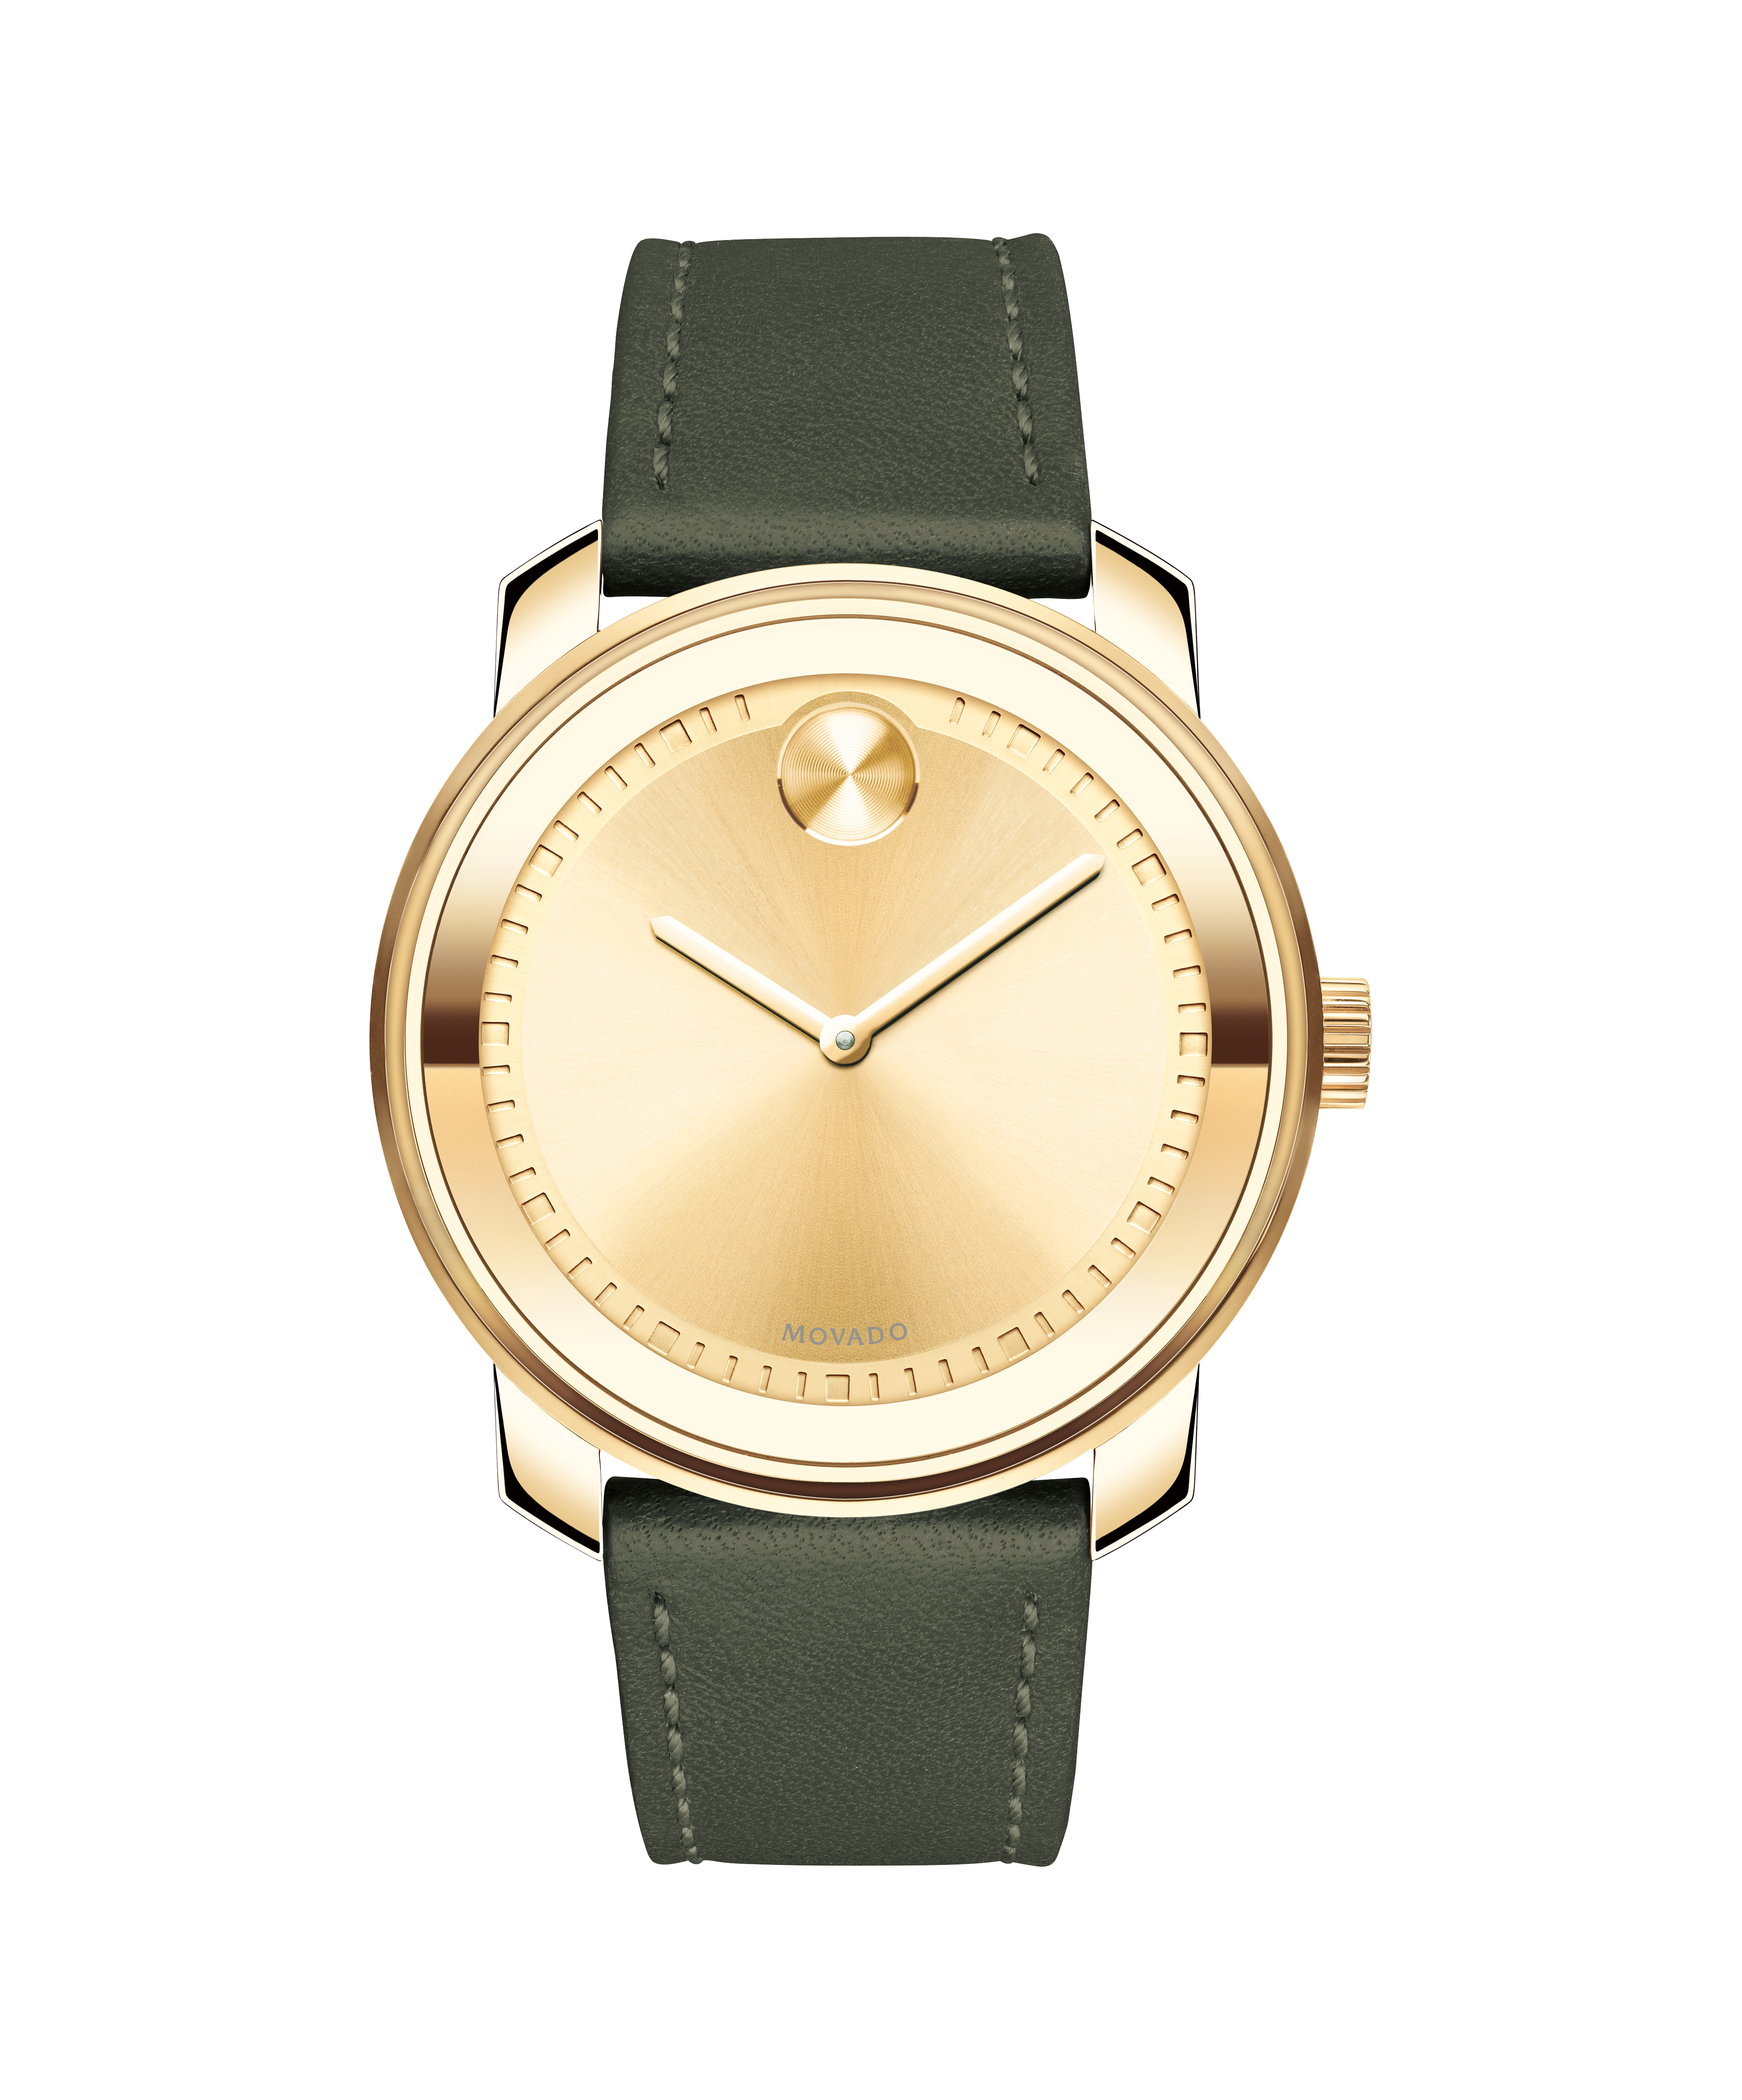 Movado Big Second Textured Dial YEARS '40 Manual Winding